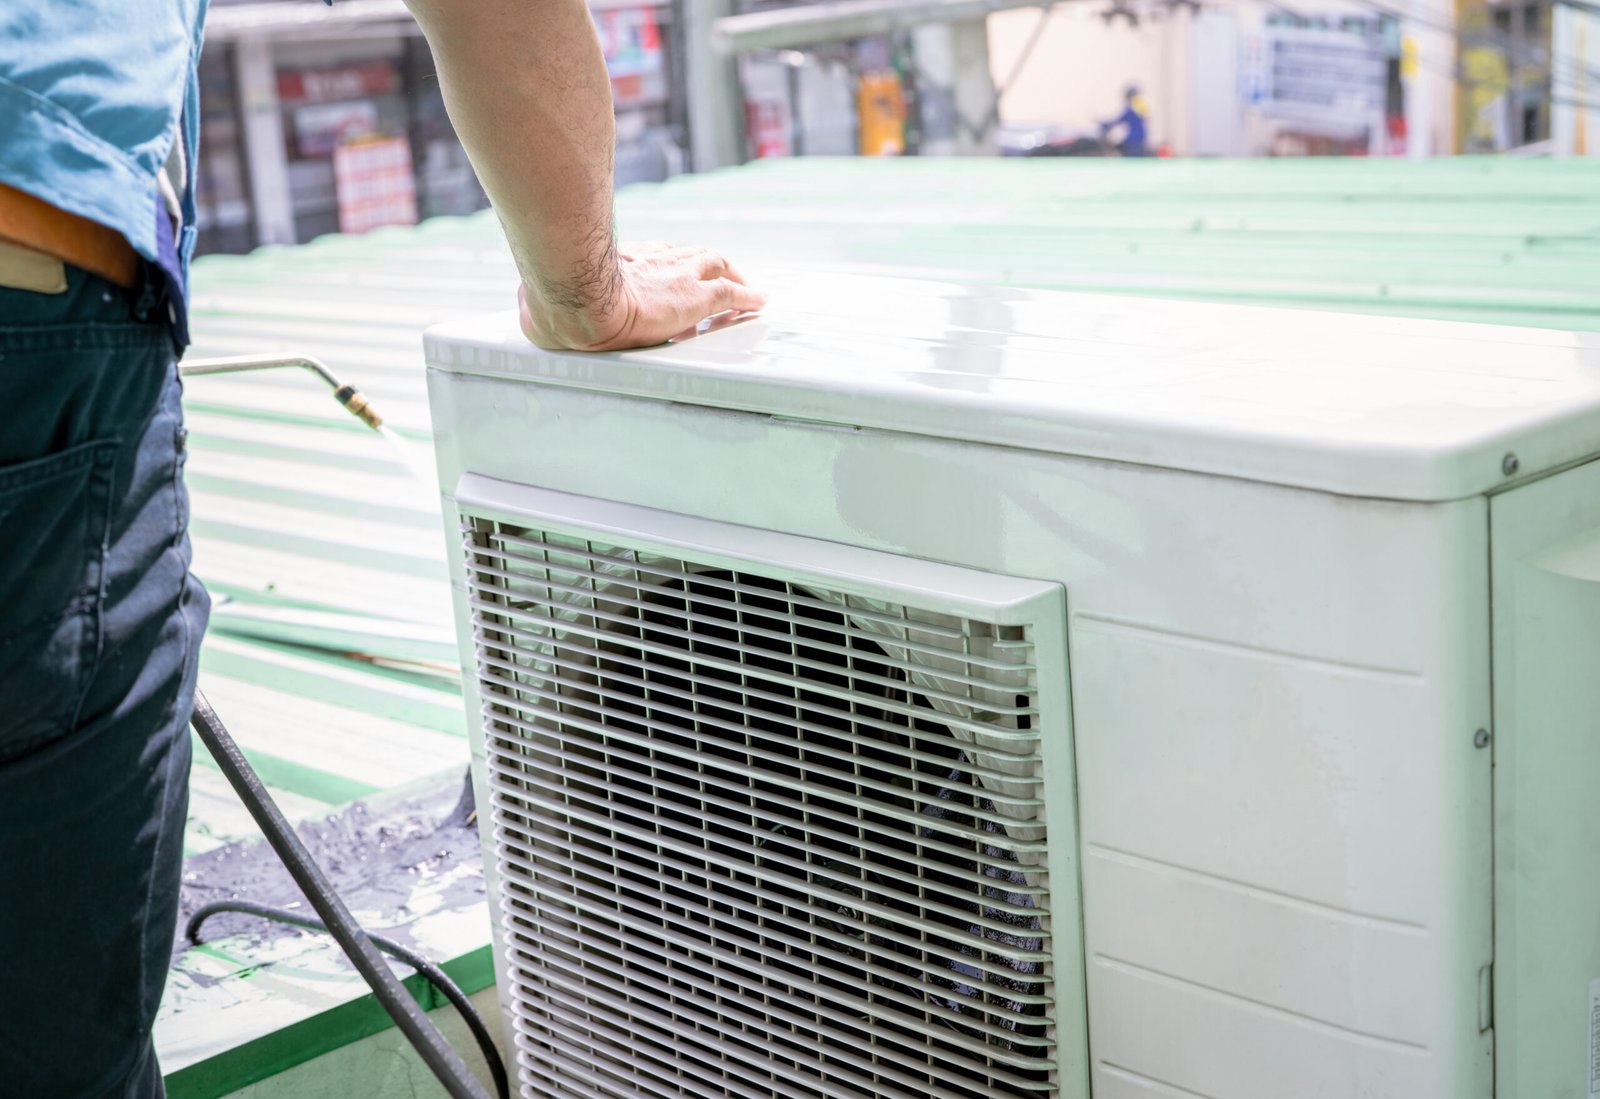 Condensing unit of an air conditioner on blur technician spraying